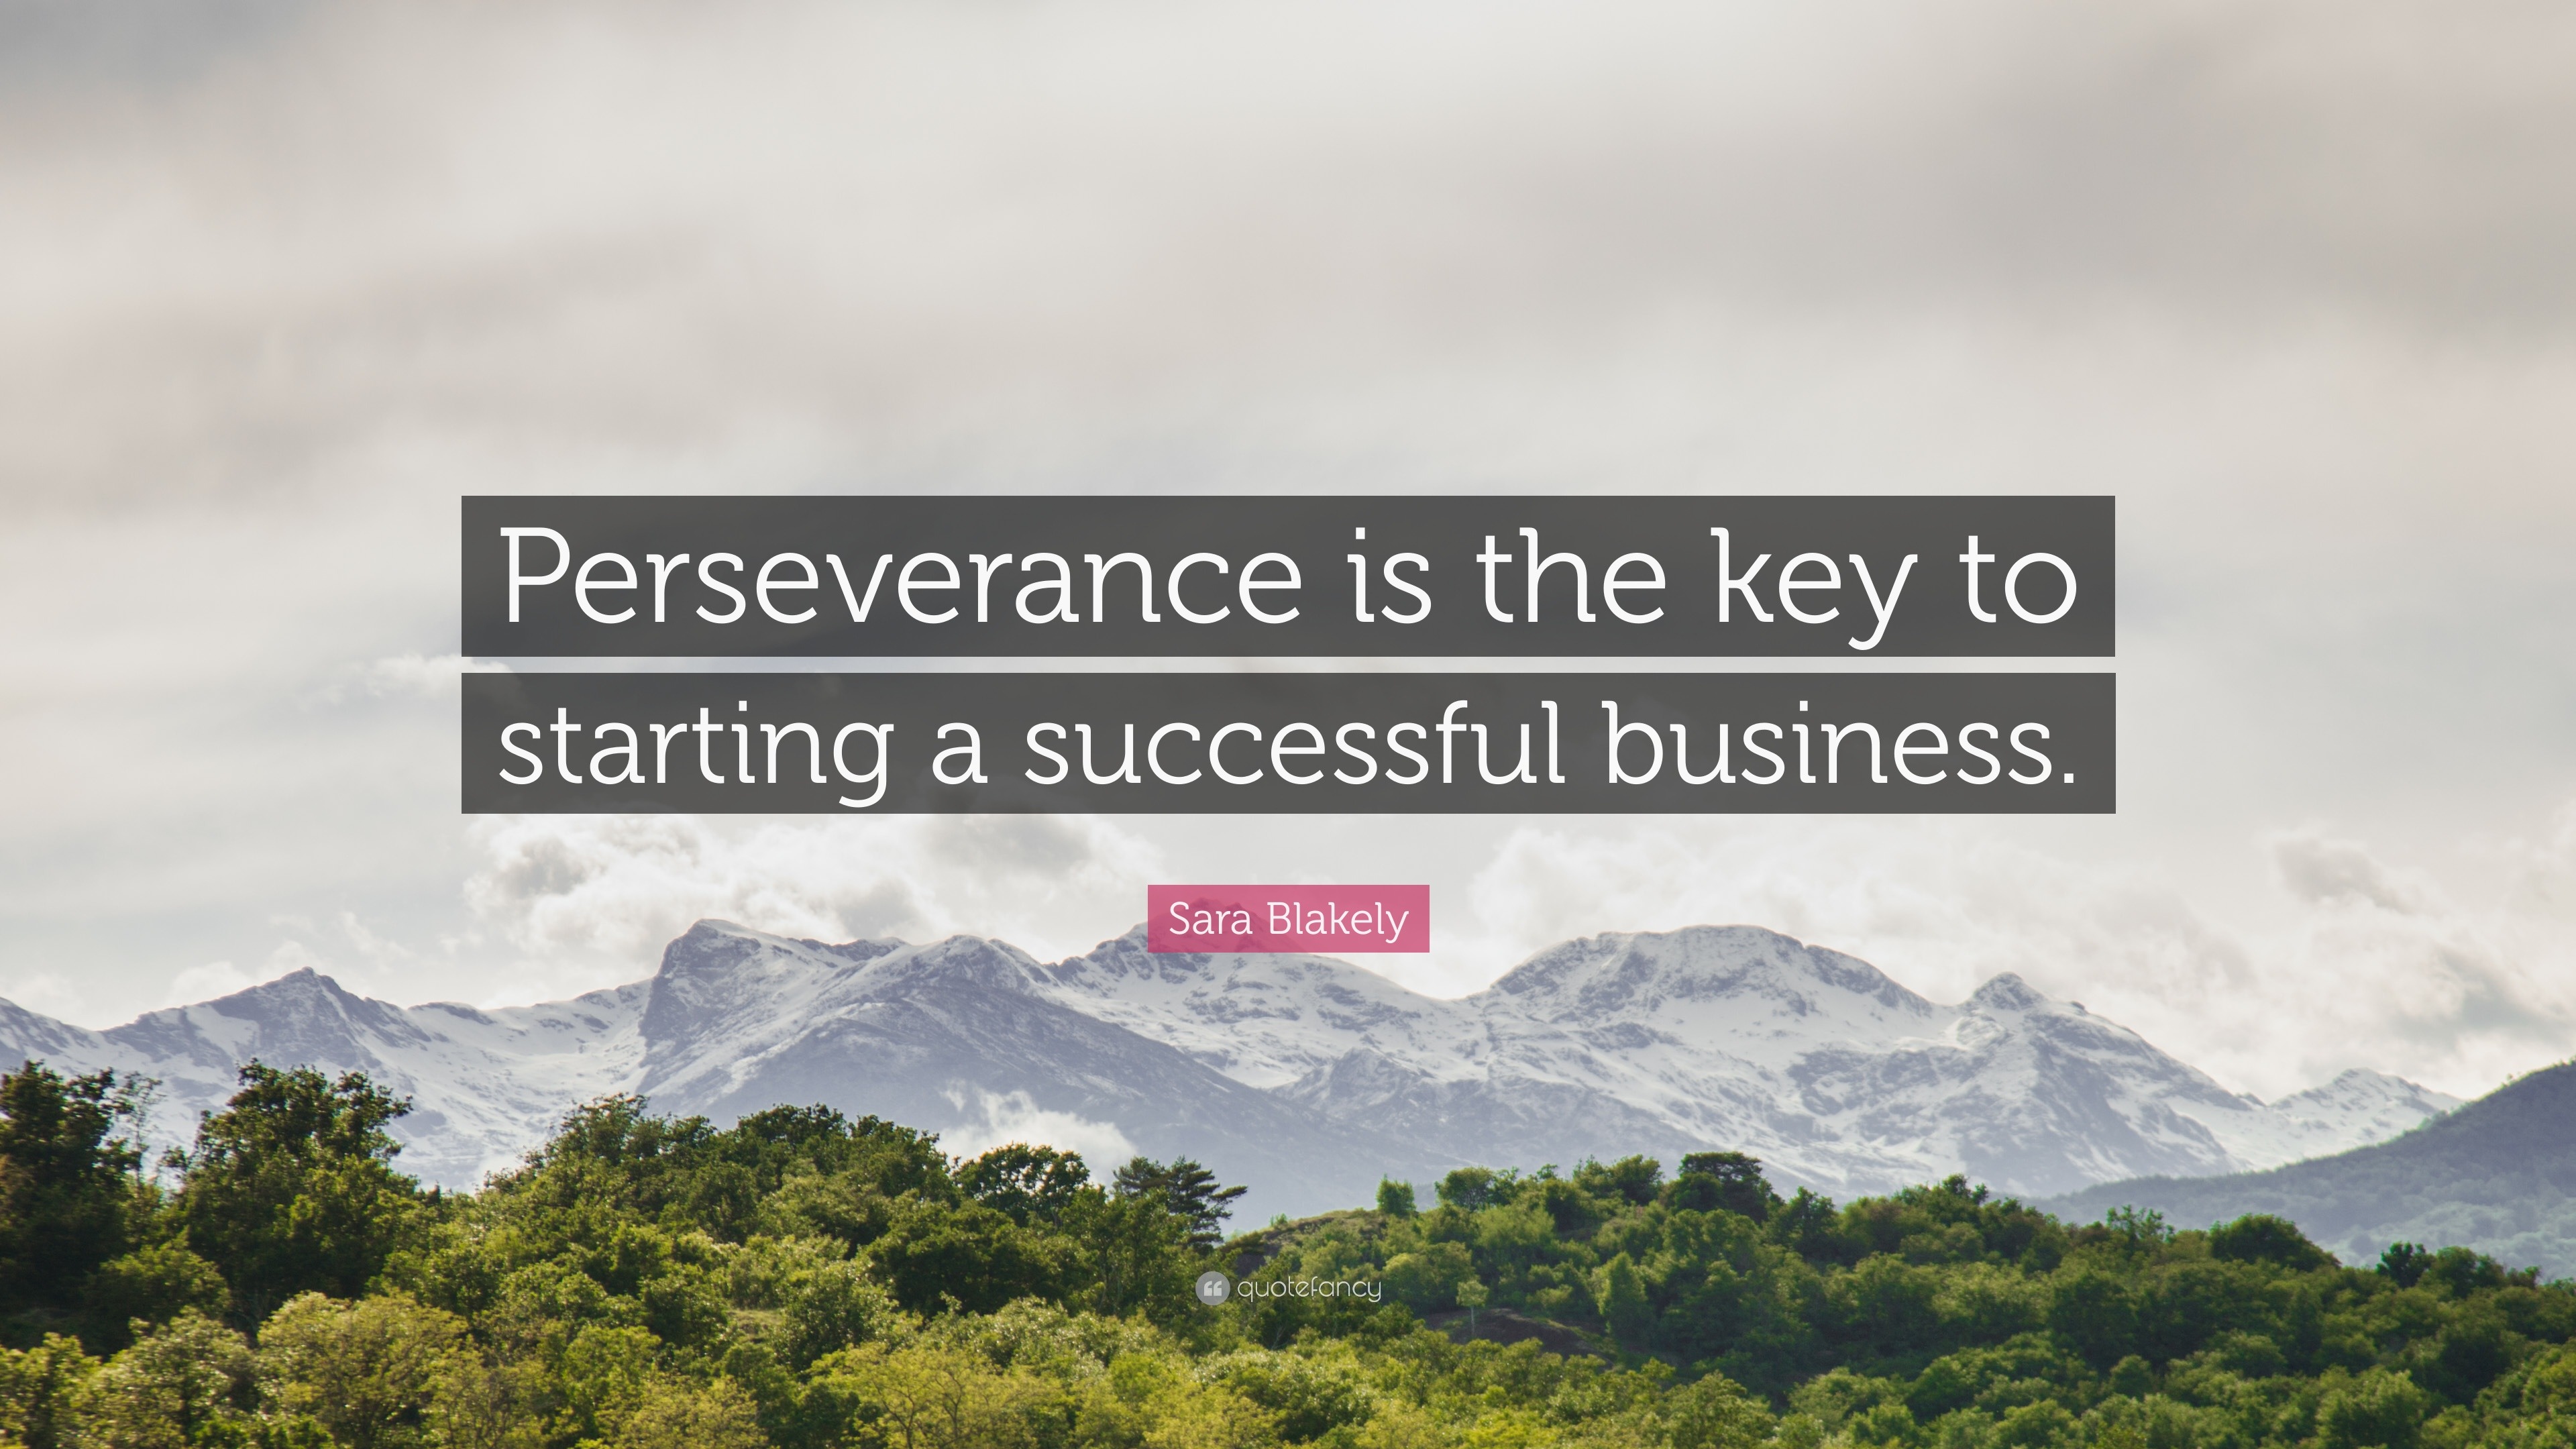 Sara Blakely Quote: “Perseverance is the key to starting a successful  business.”